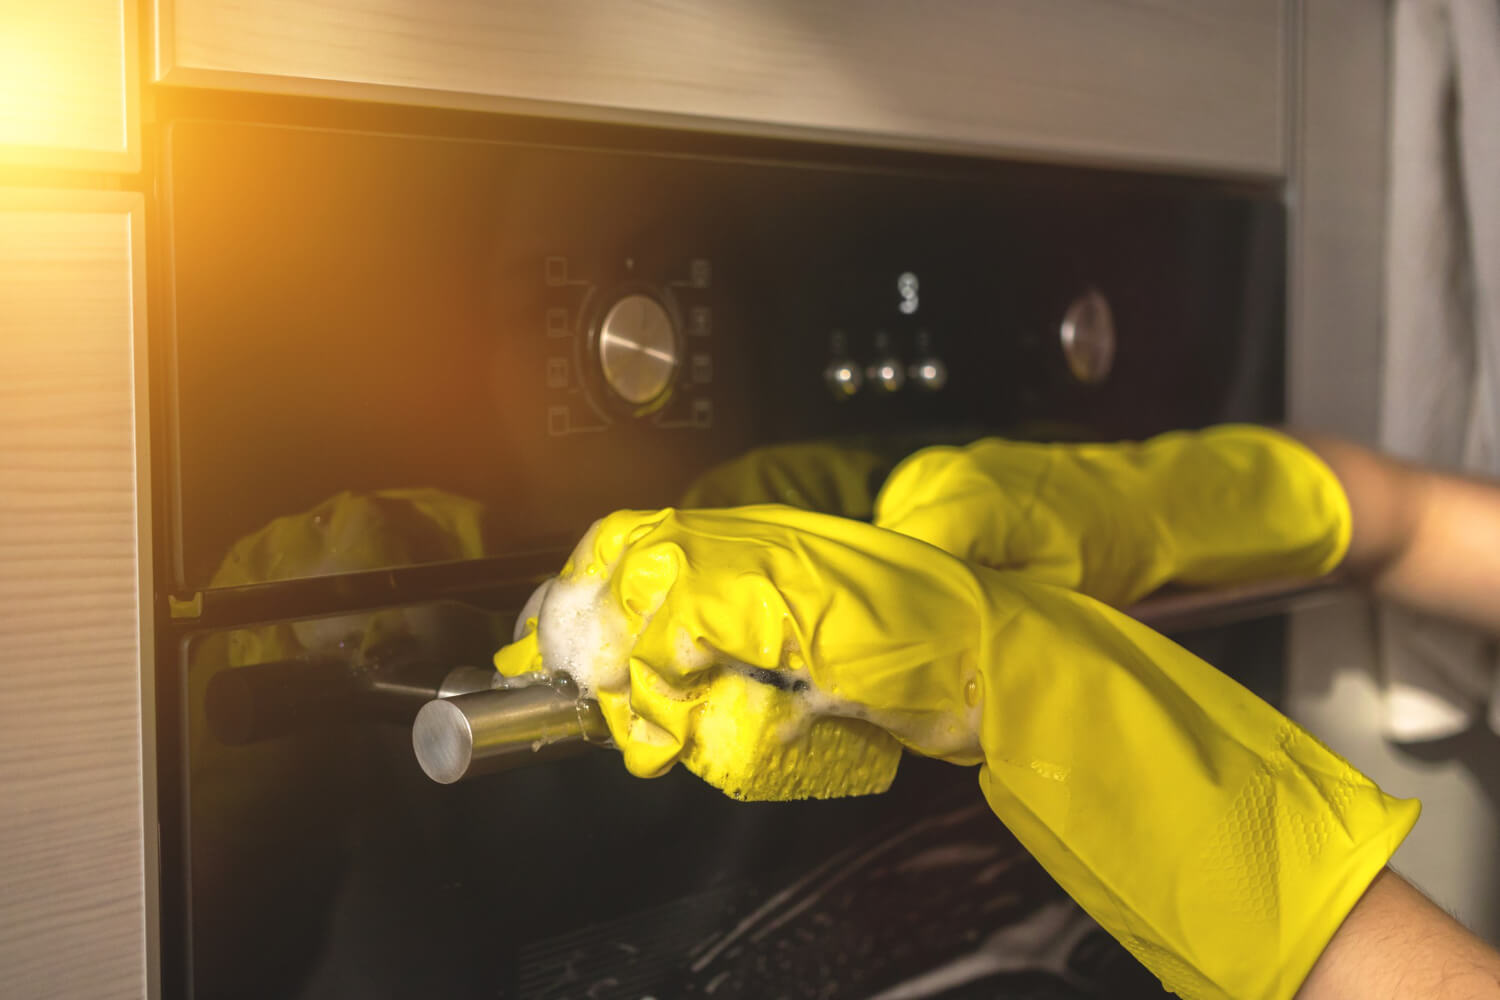 wiping cleaning oven door home kitchen with yellow rubber glove and sponge